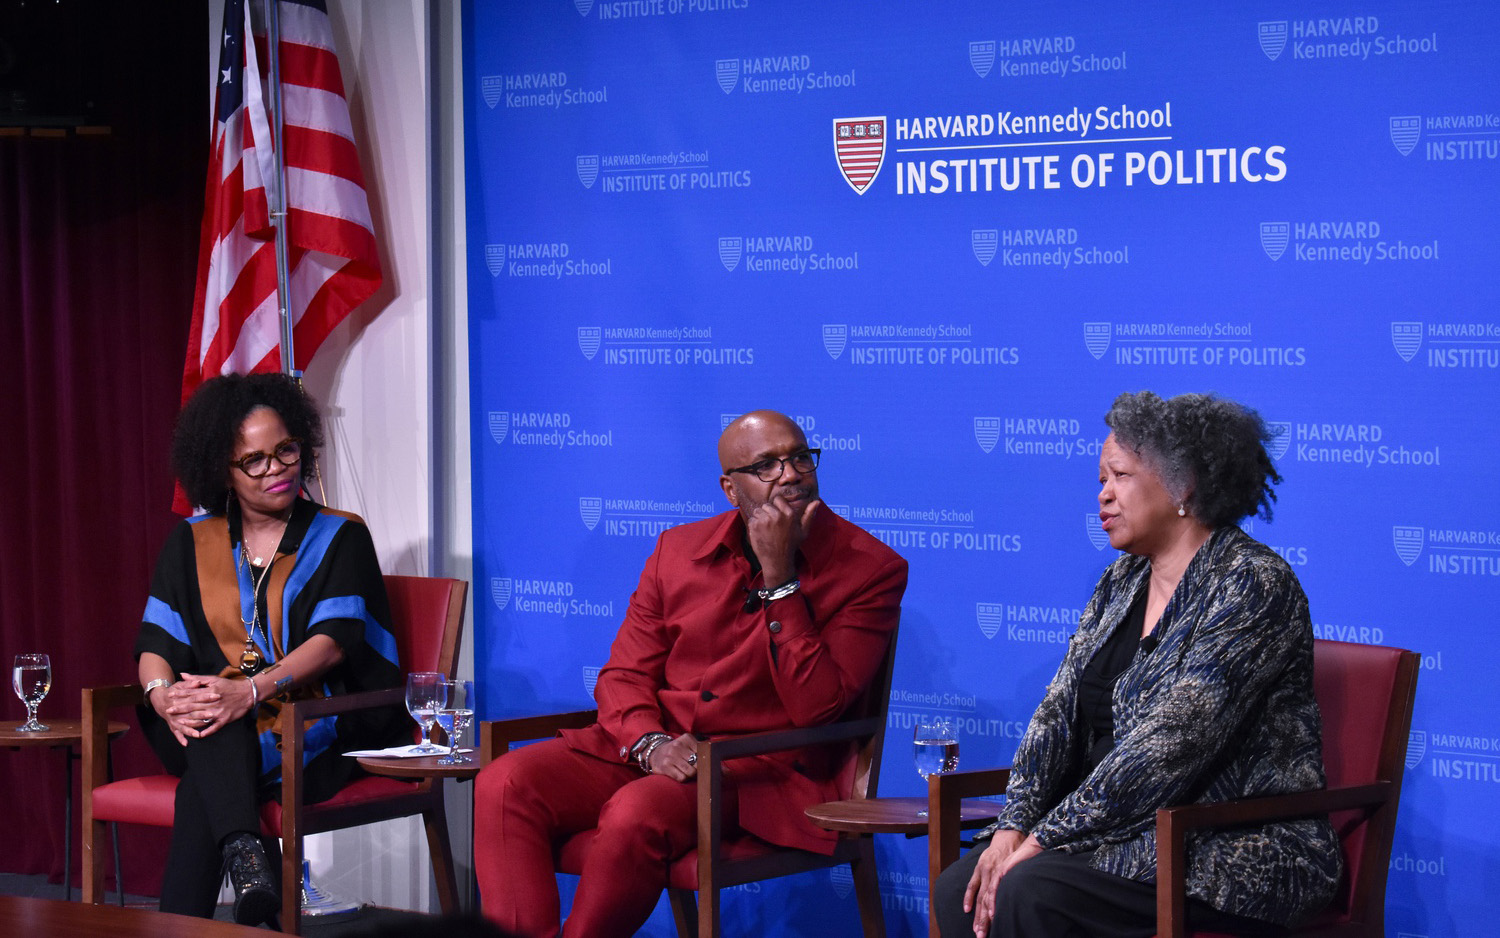 Racial Justice Advocates Discuss Institutional Change at IOP Forum (Photo by Bethany Versoy)